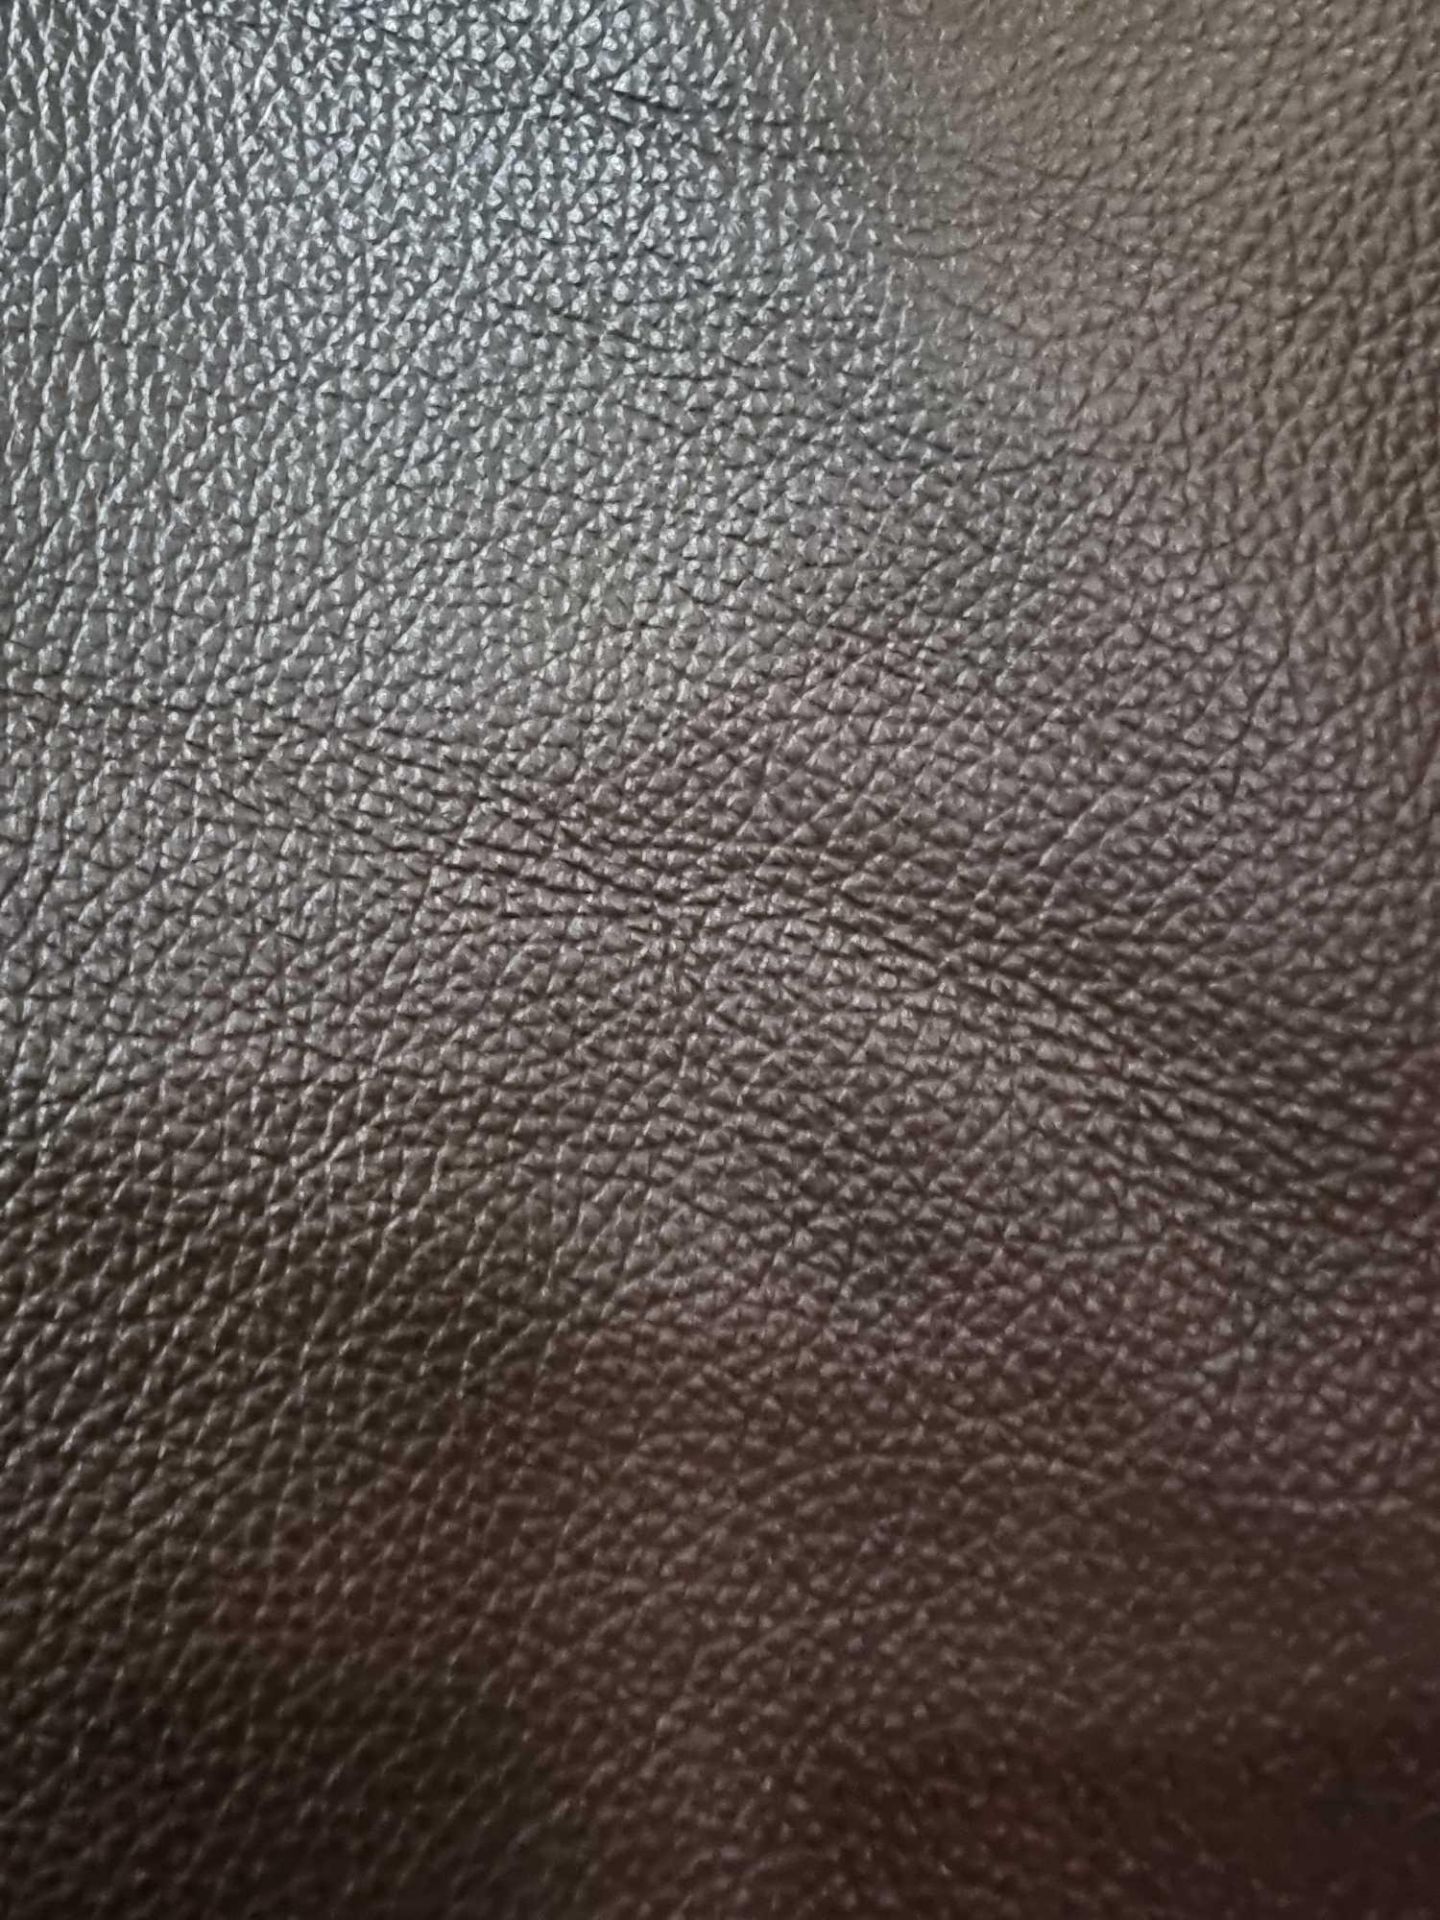 Mastrotto Hudson Chocolate Leather Hide approximately 3 4M2 2 x 1 7cm ( Hide No,243) - Image 2 of 2